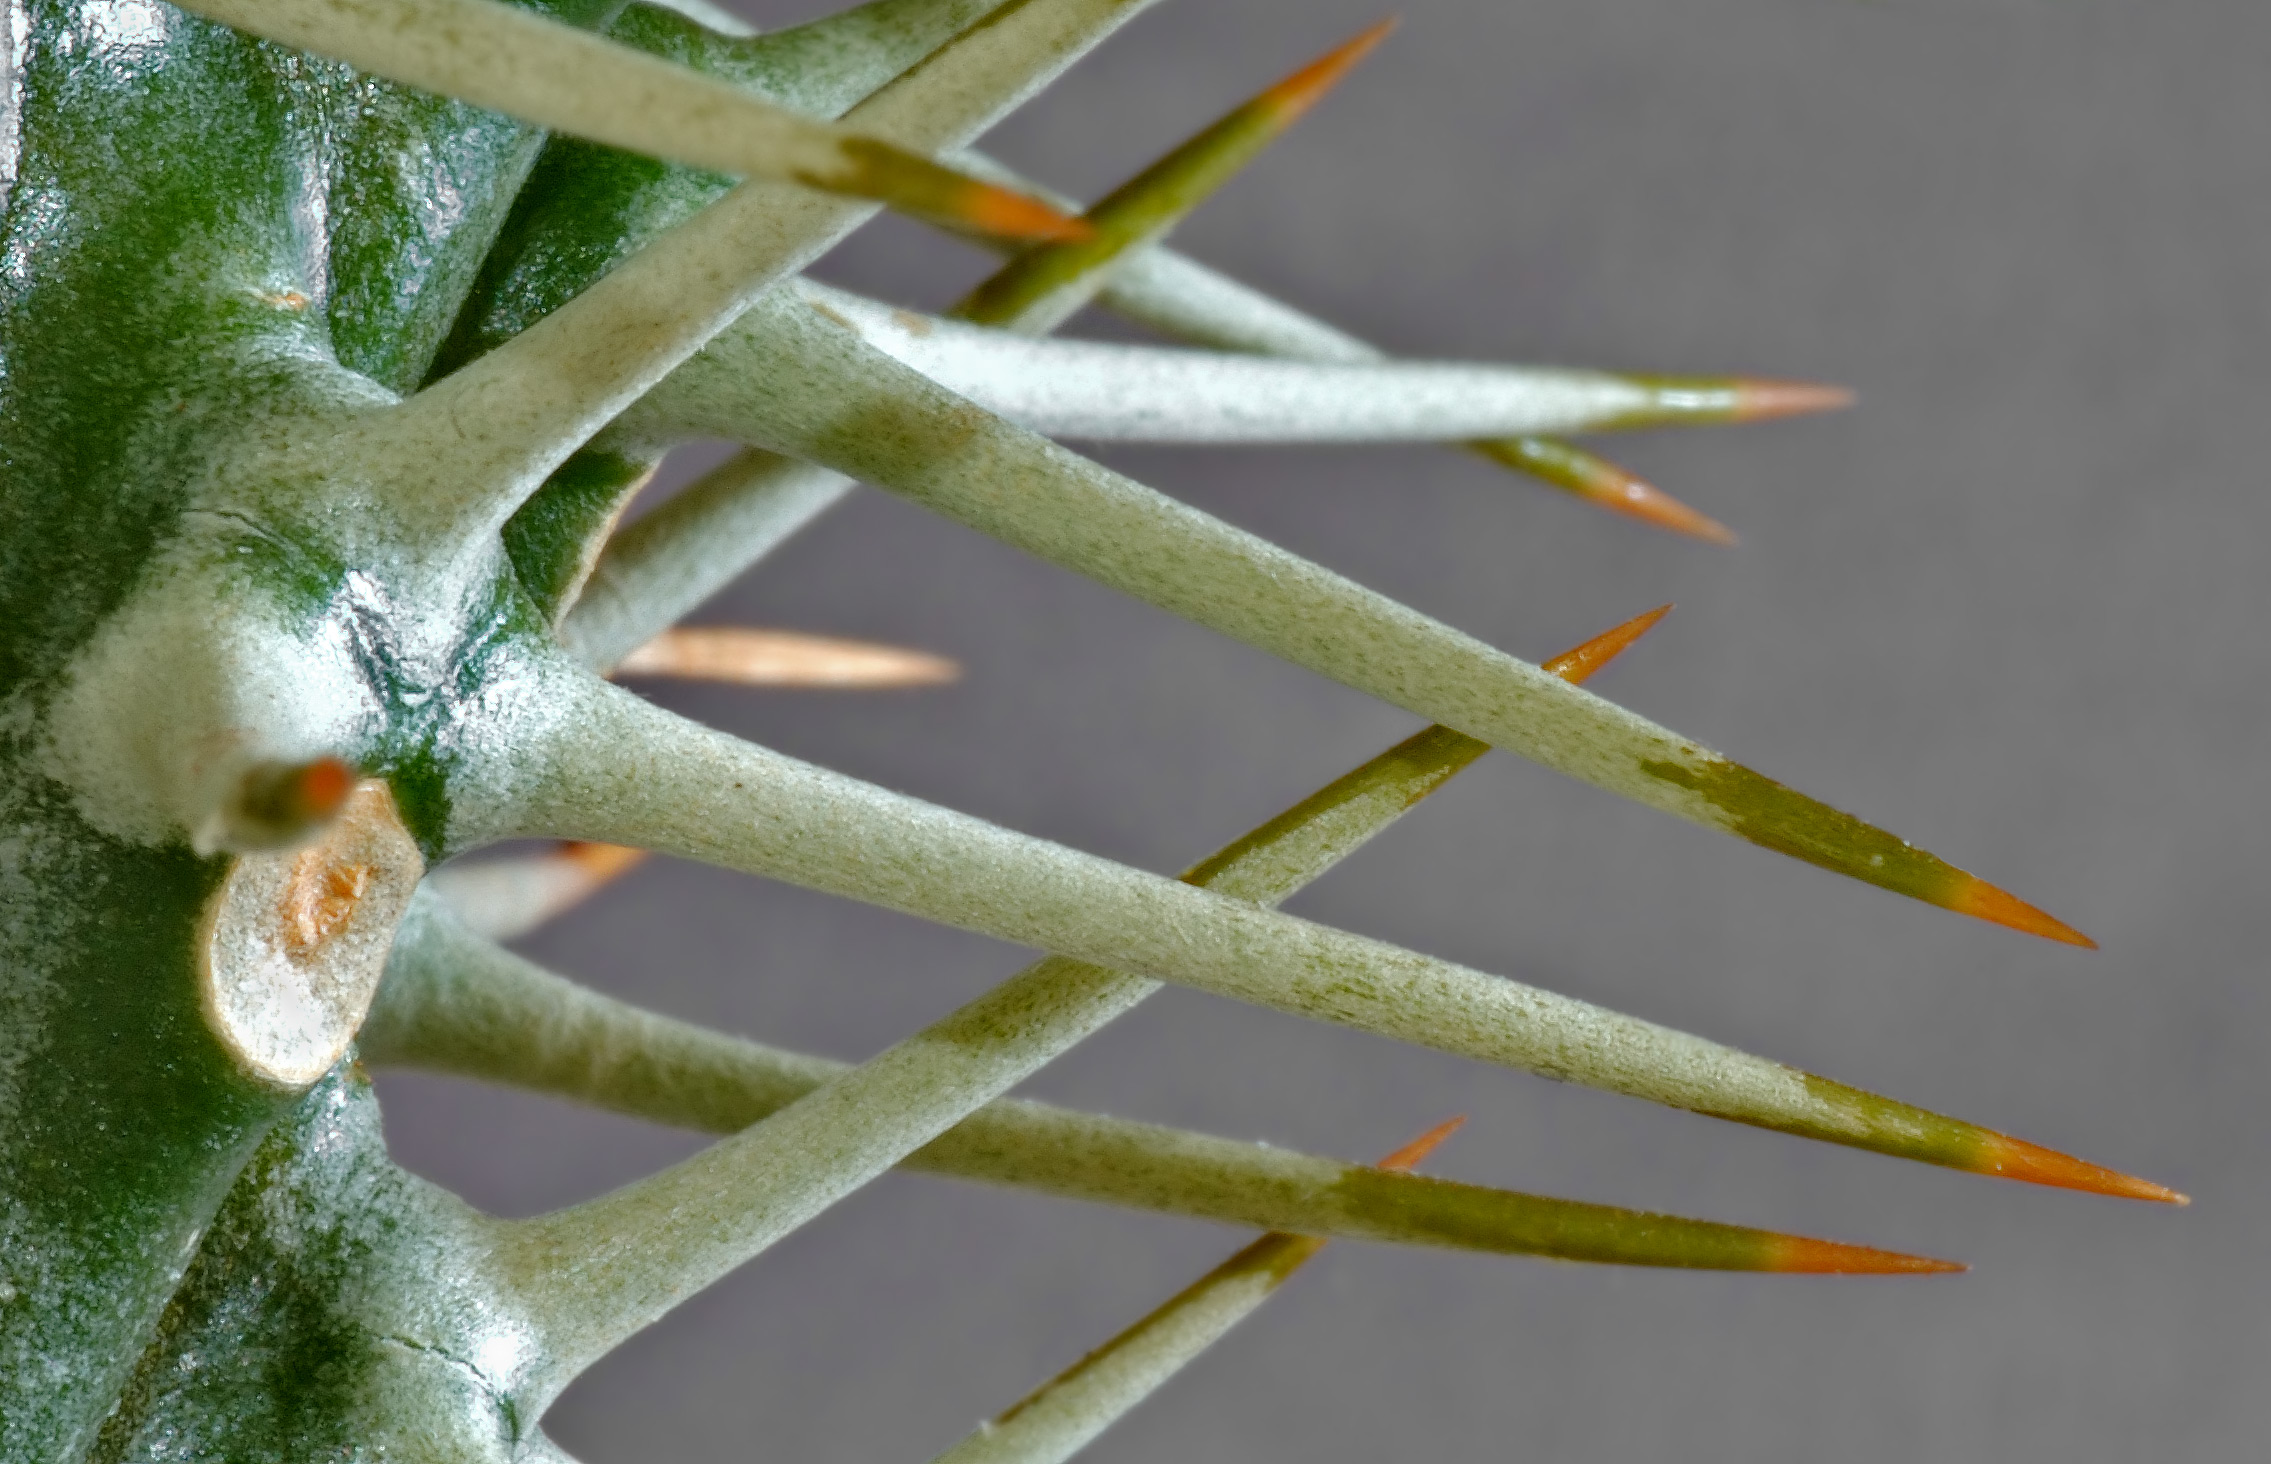 Several spines from a cactus. 